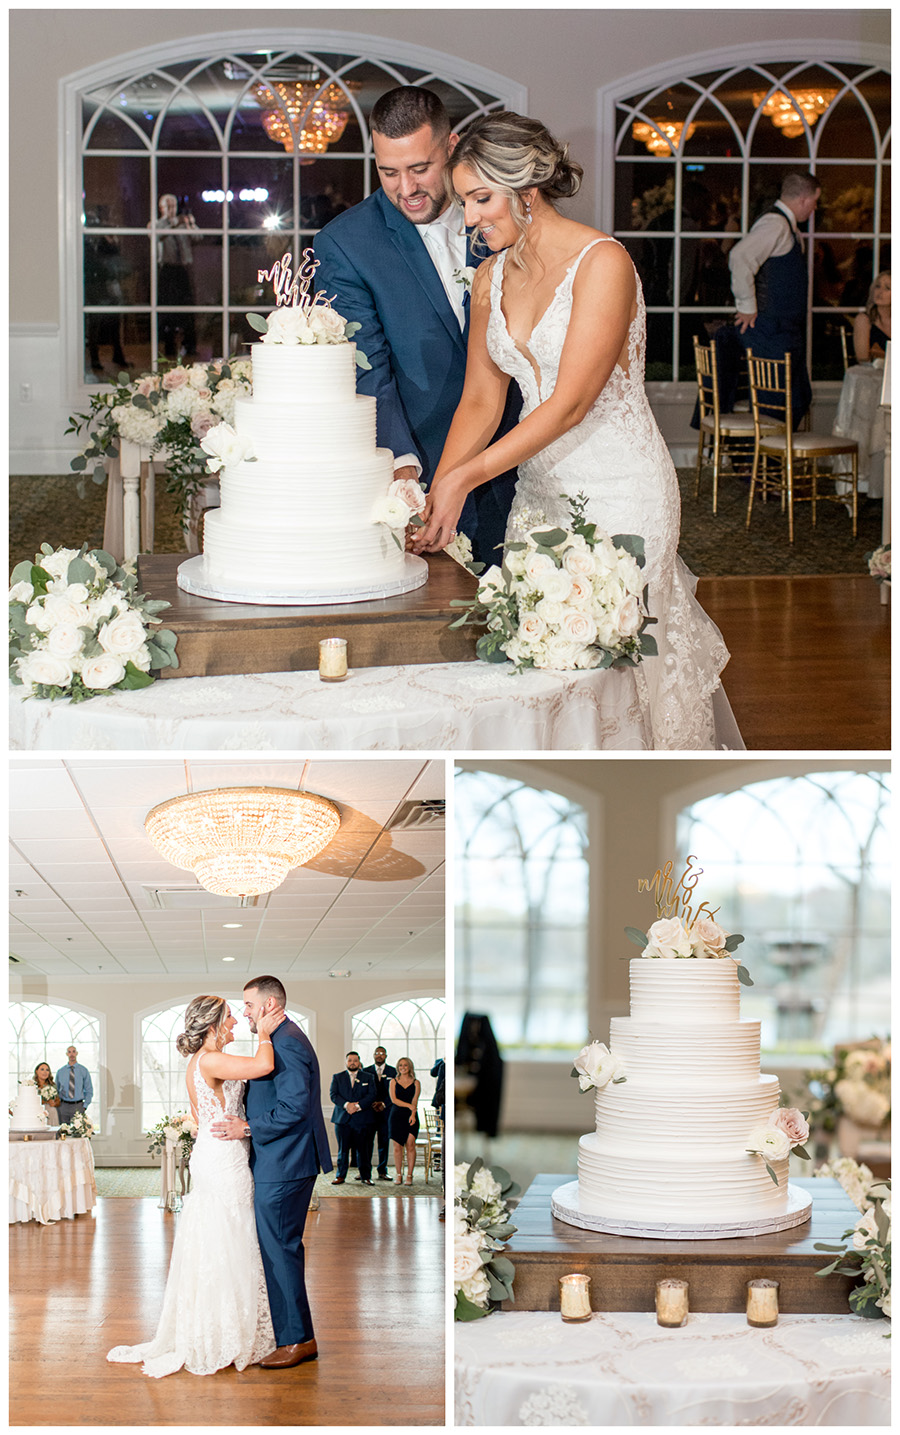 Bride and groom cut their cake in the ballroom at the Bradford Estate